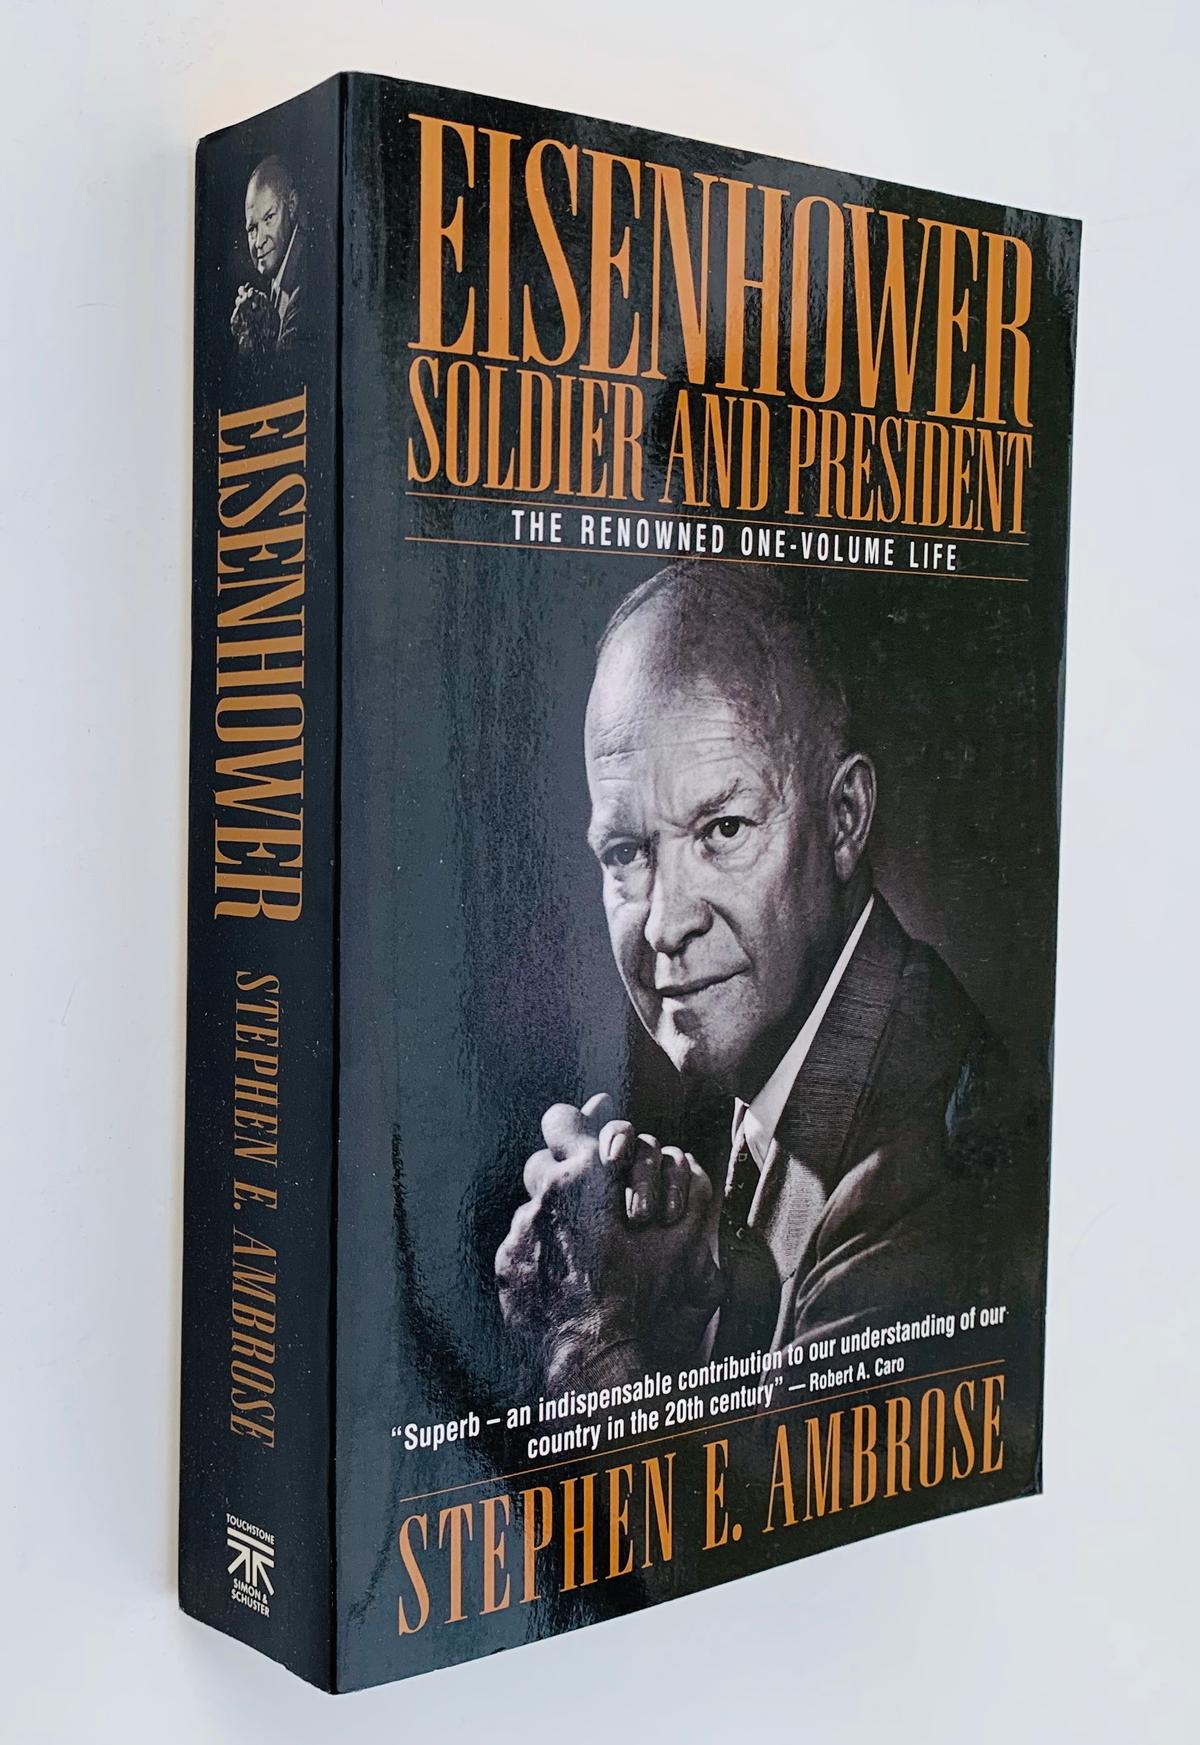 EISENHOWER Soldier and President by Stephen E. Ambrose with FIRST DAY COVERS